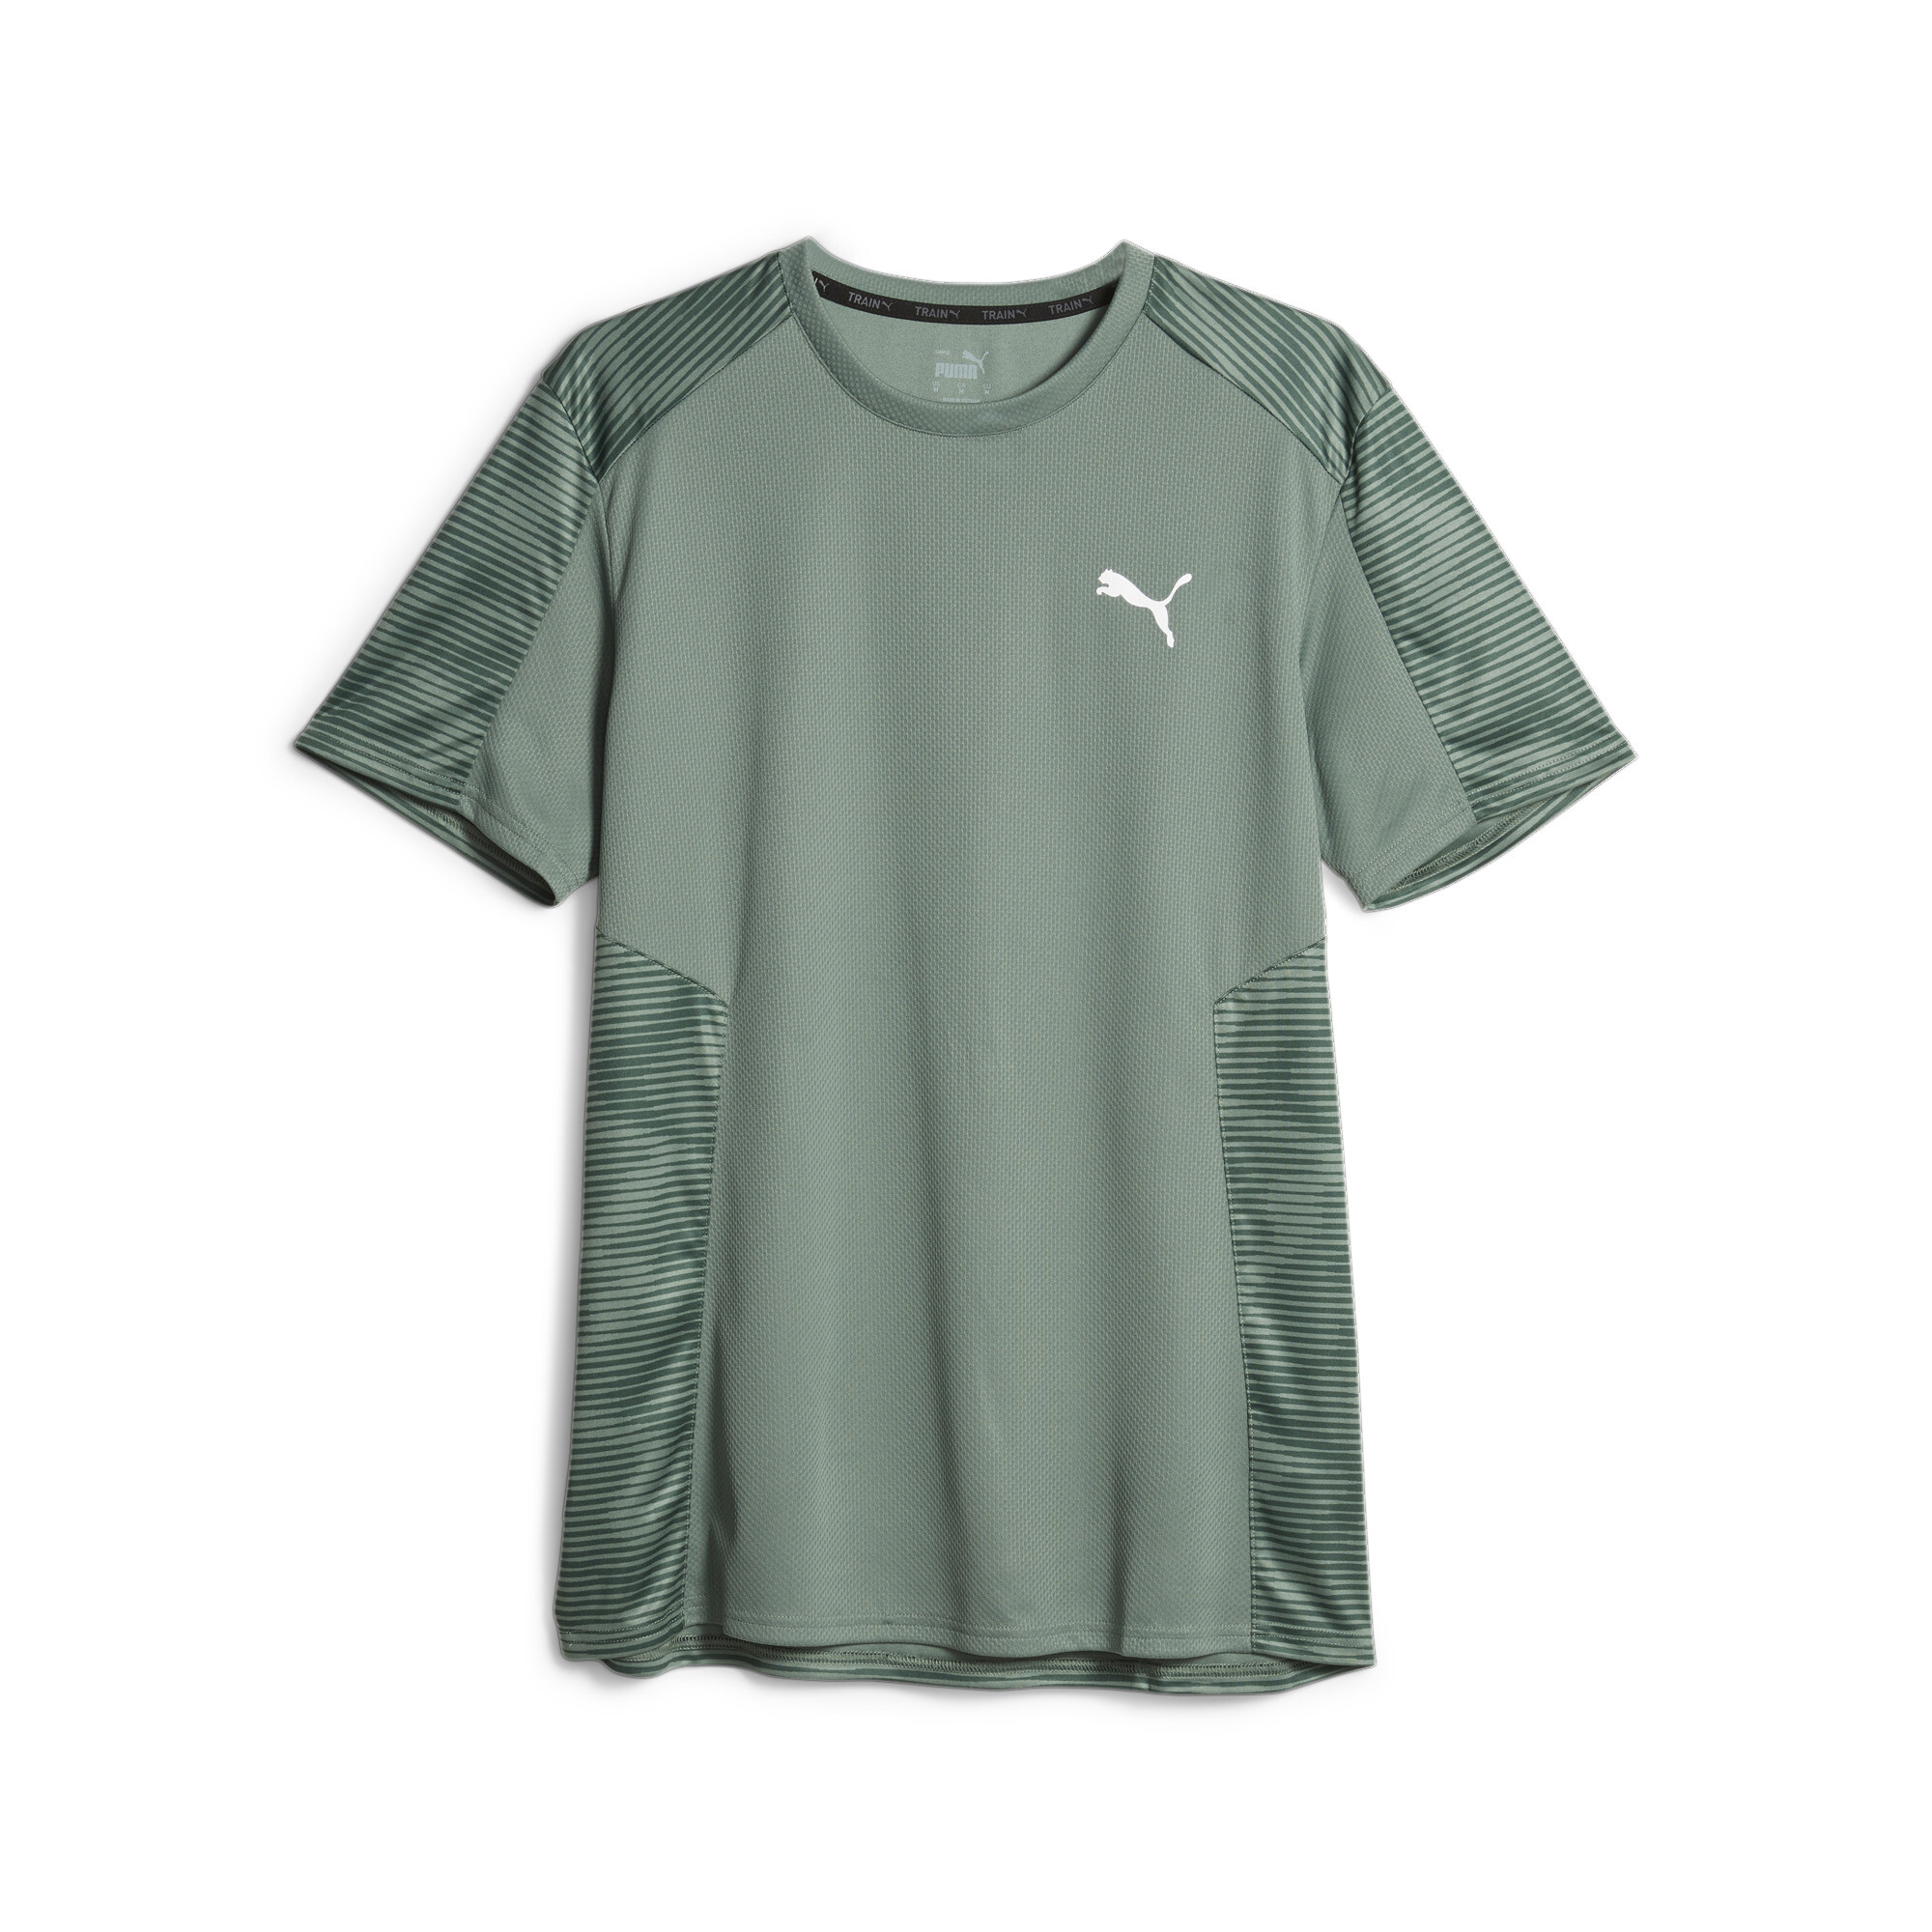 Men's PUMA M Concept Hyperwave Training T-Shirt In Green, Size Small